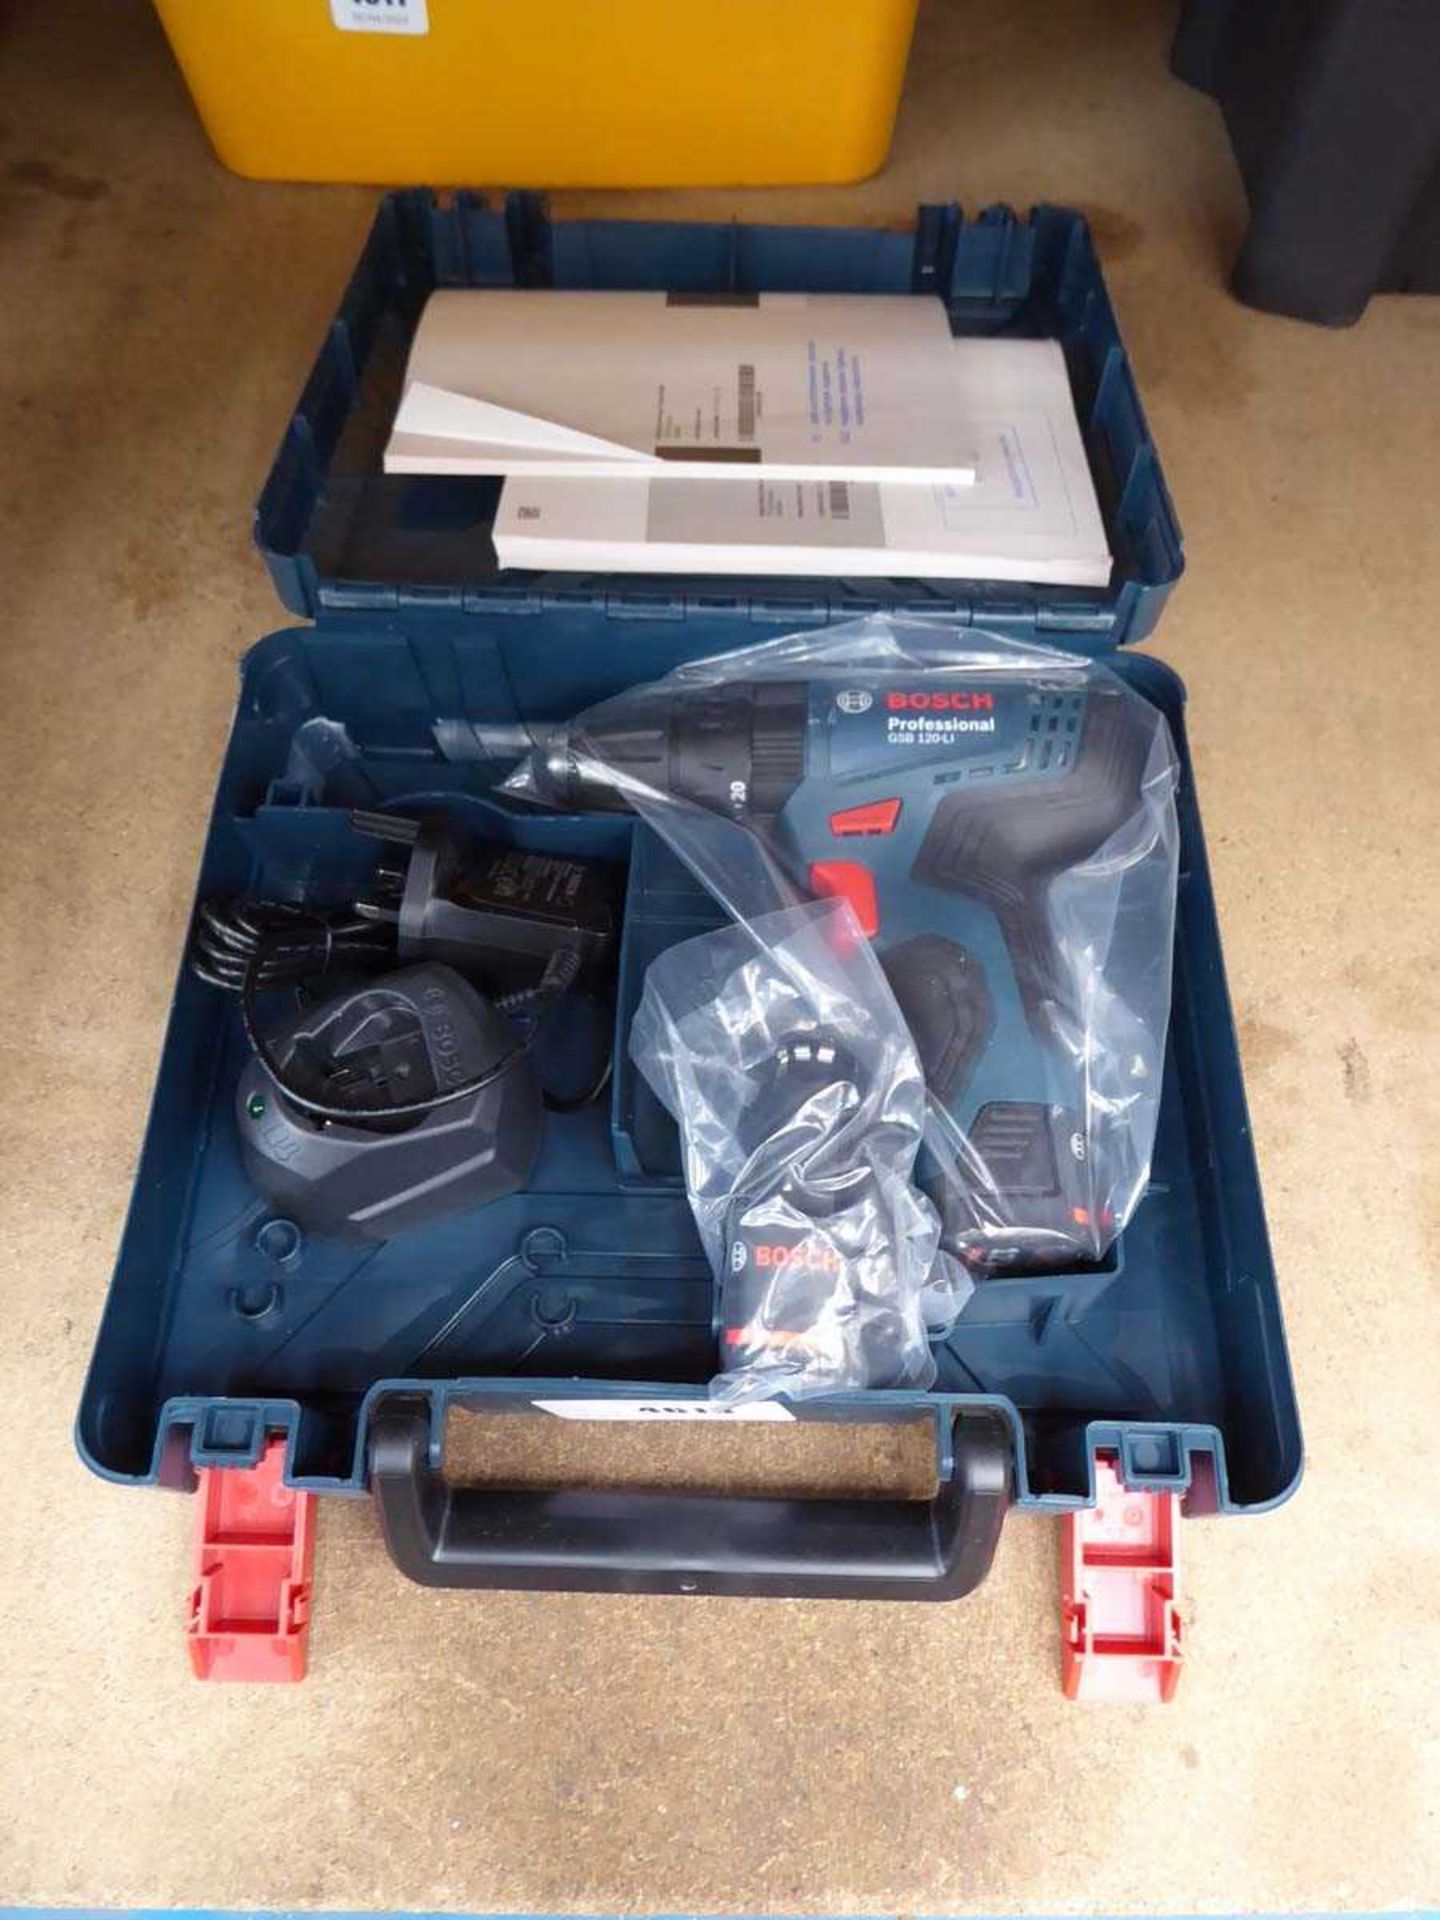 +VAT Bosch small battery drill with 2 batteries and charger